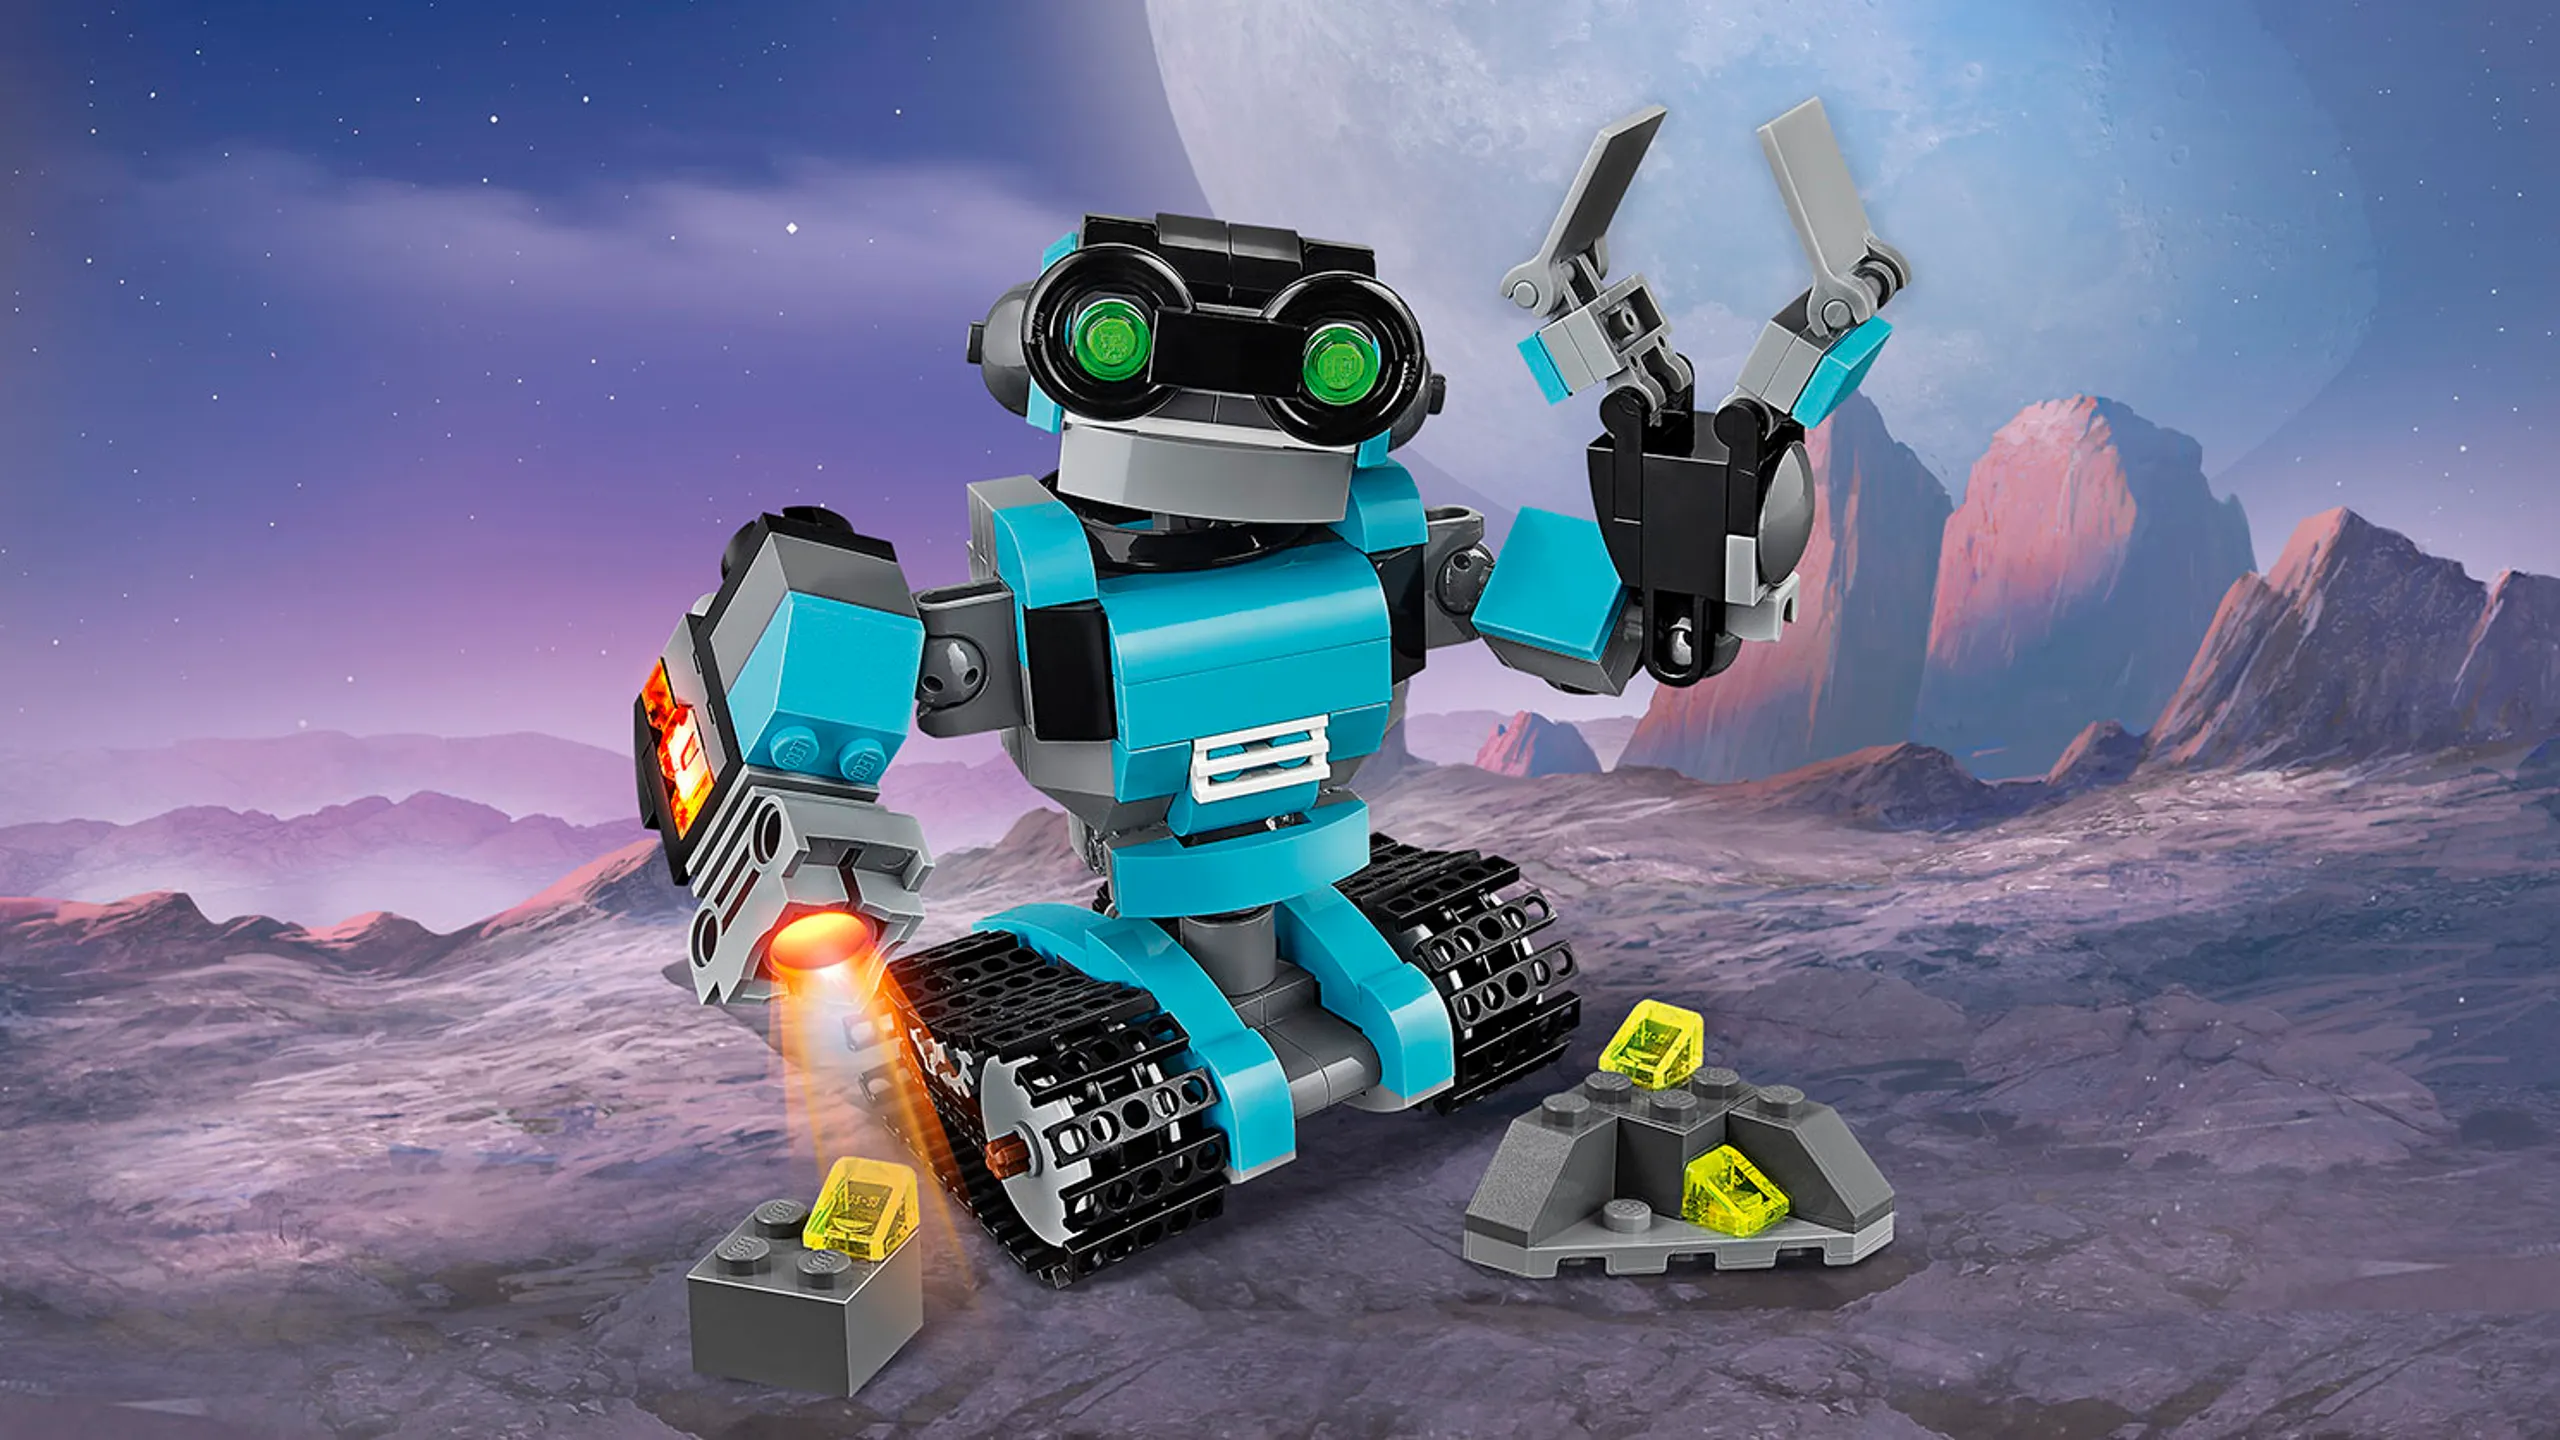 LEGO Creator 3 in 1 - 31062 Robo Explorer - this blue and grey robot investigates the surface and materials of a foreign planet.